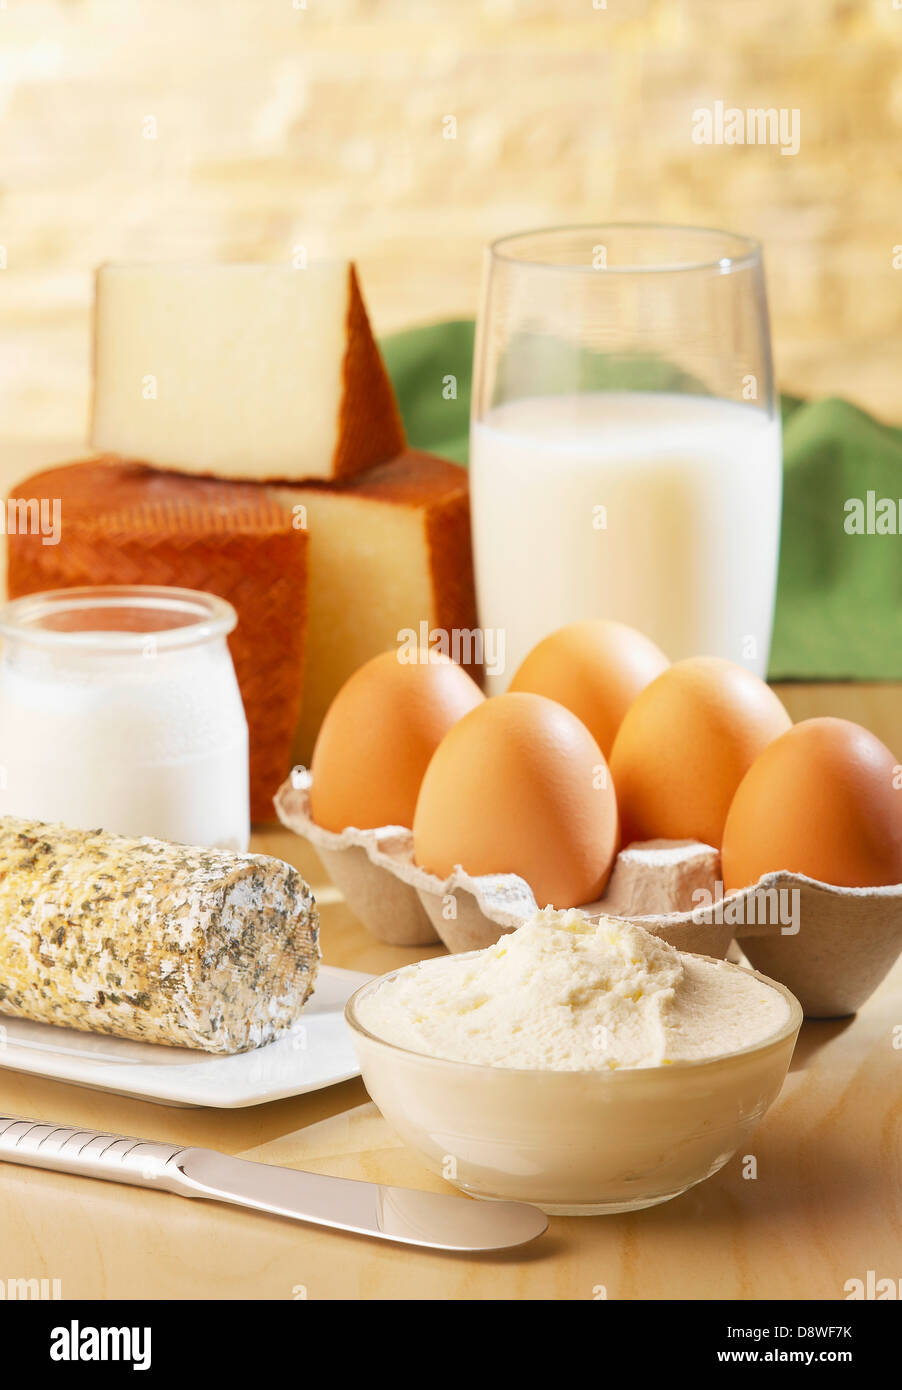 Dairy product composition Stock Photo